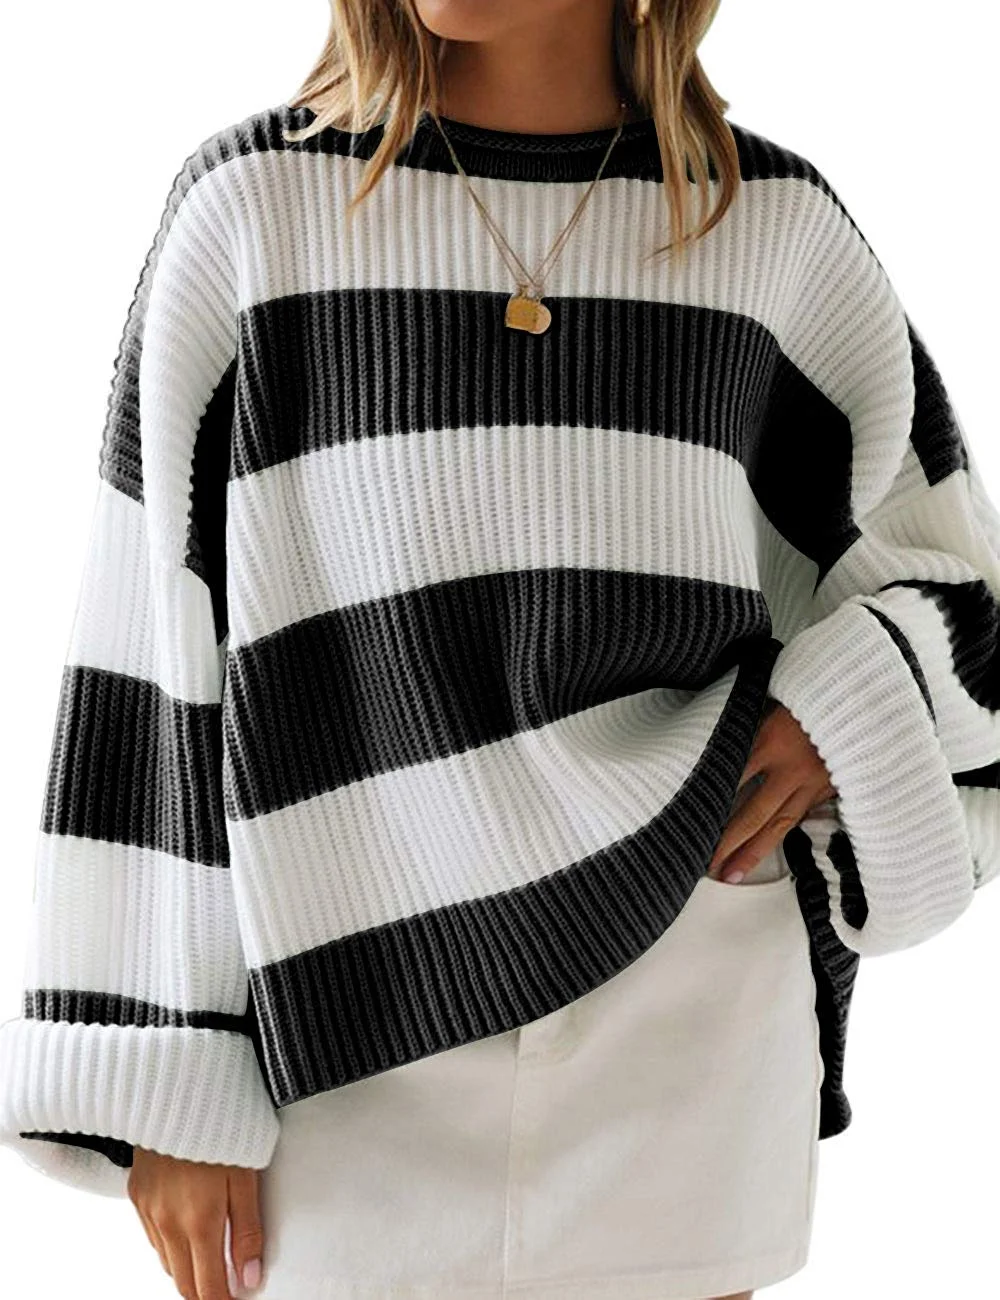 Women Color Block Striped Oversized Sweaters Long Sleeve Crewneck Pullover Loose Chunky Knit Jumper